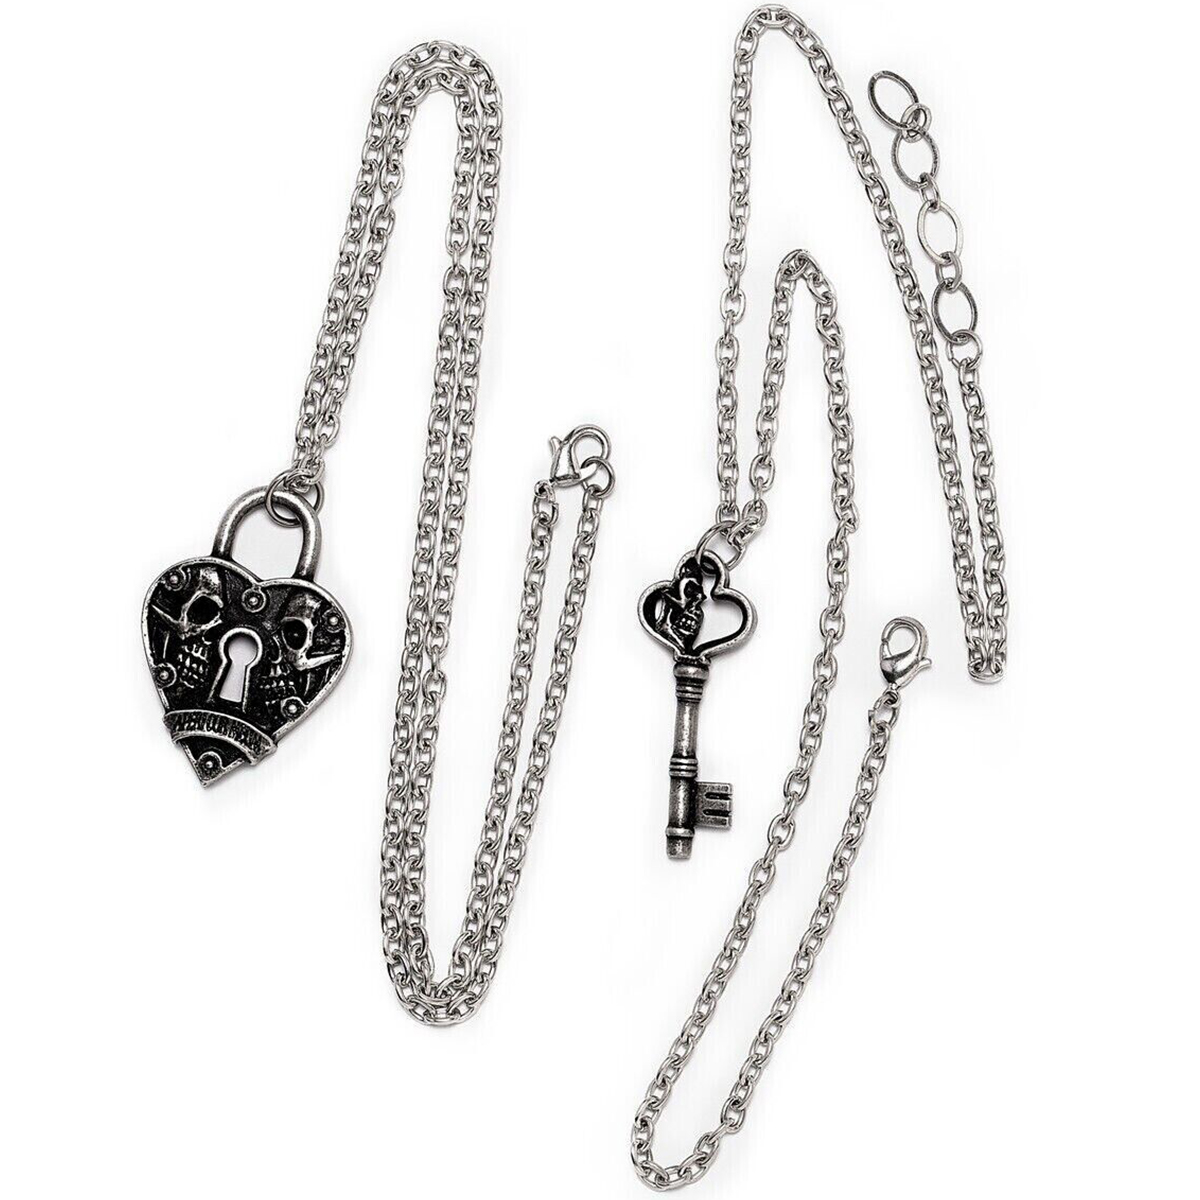 Key to Your Heart Ornate Lock and Key necklace in black stainless